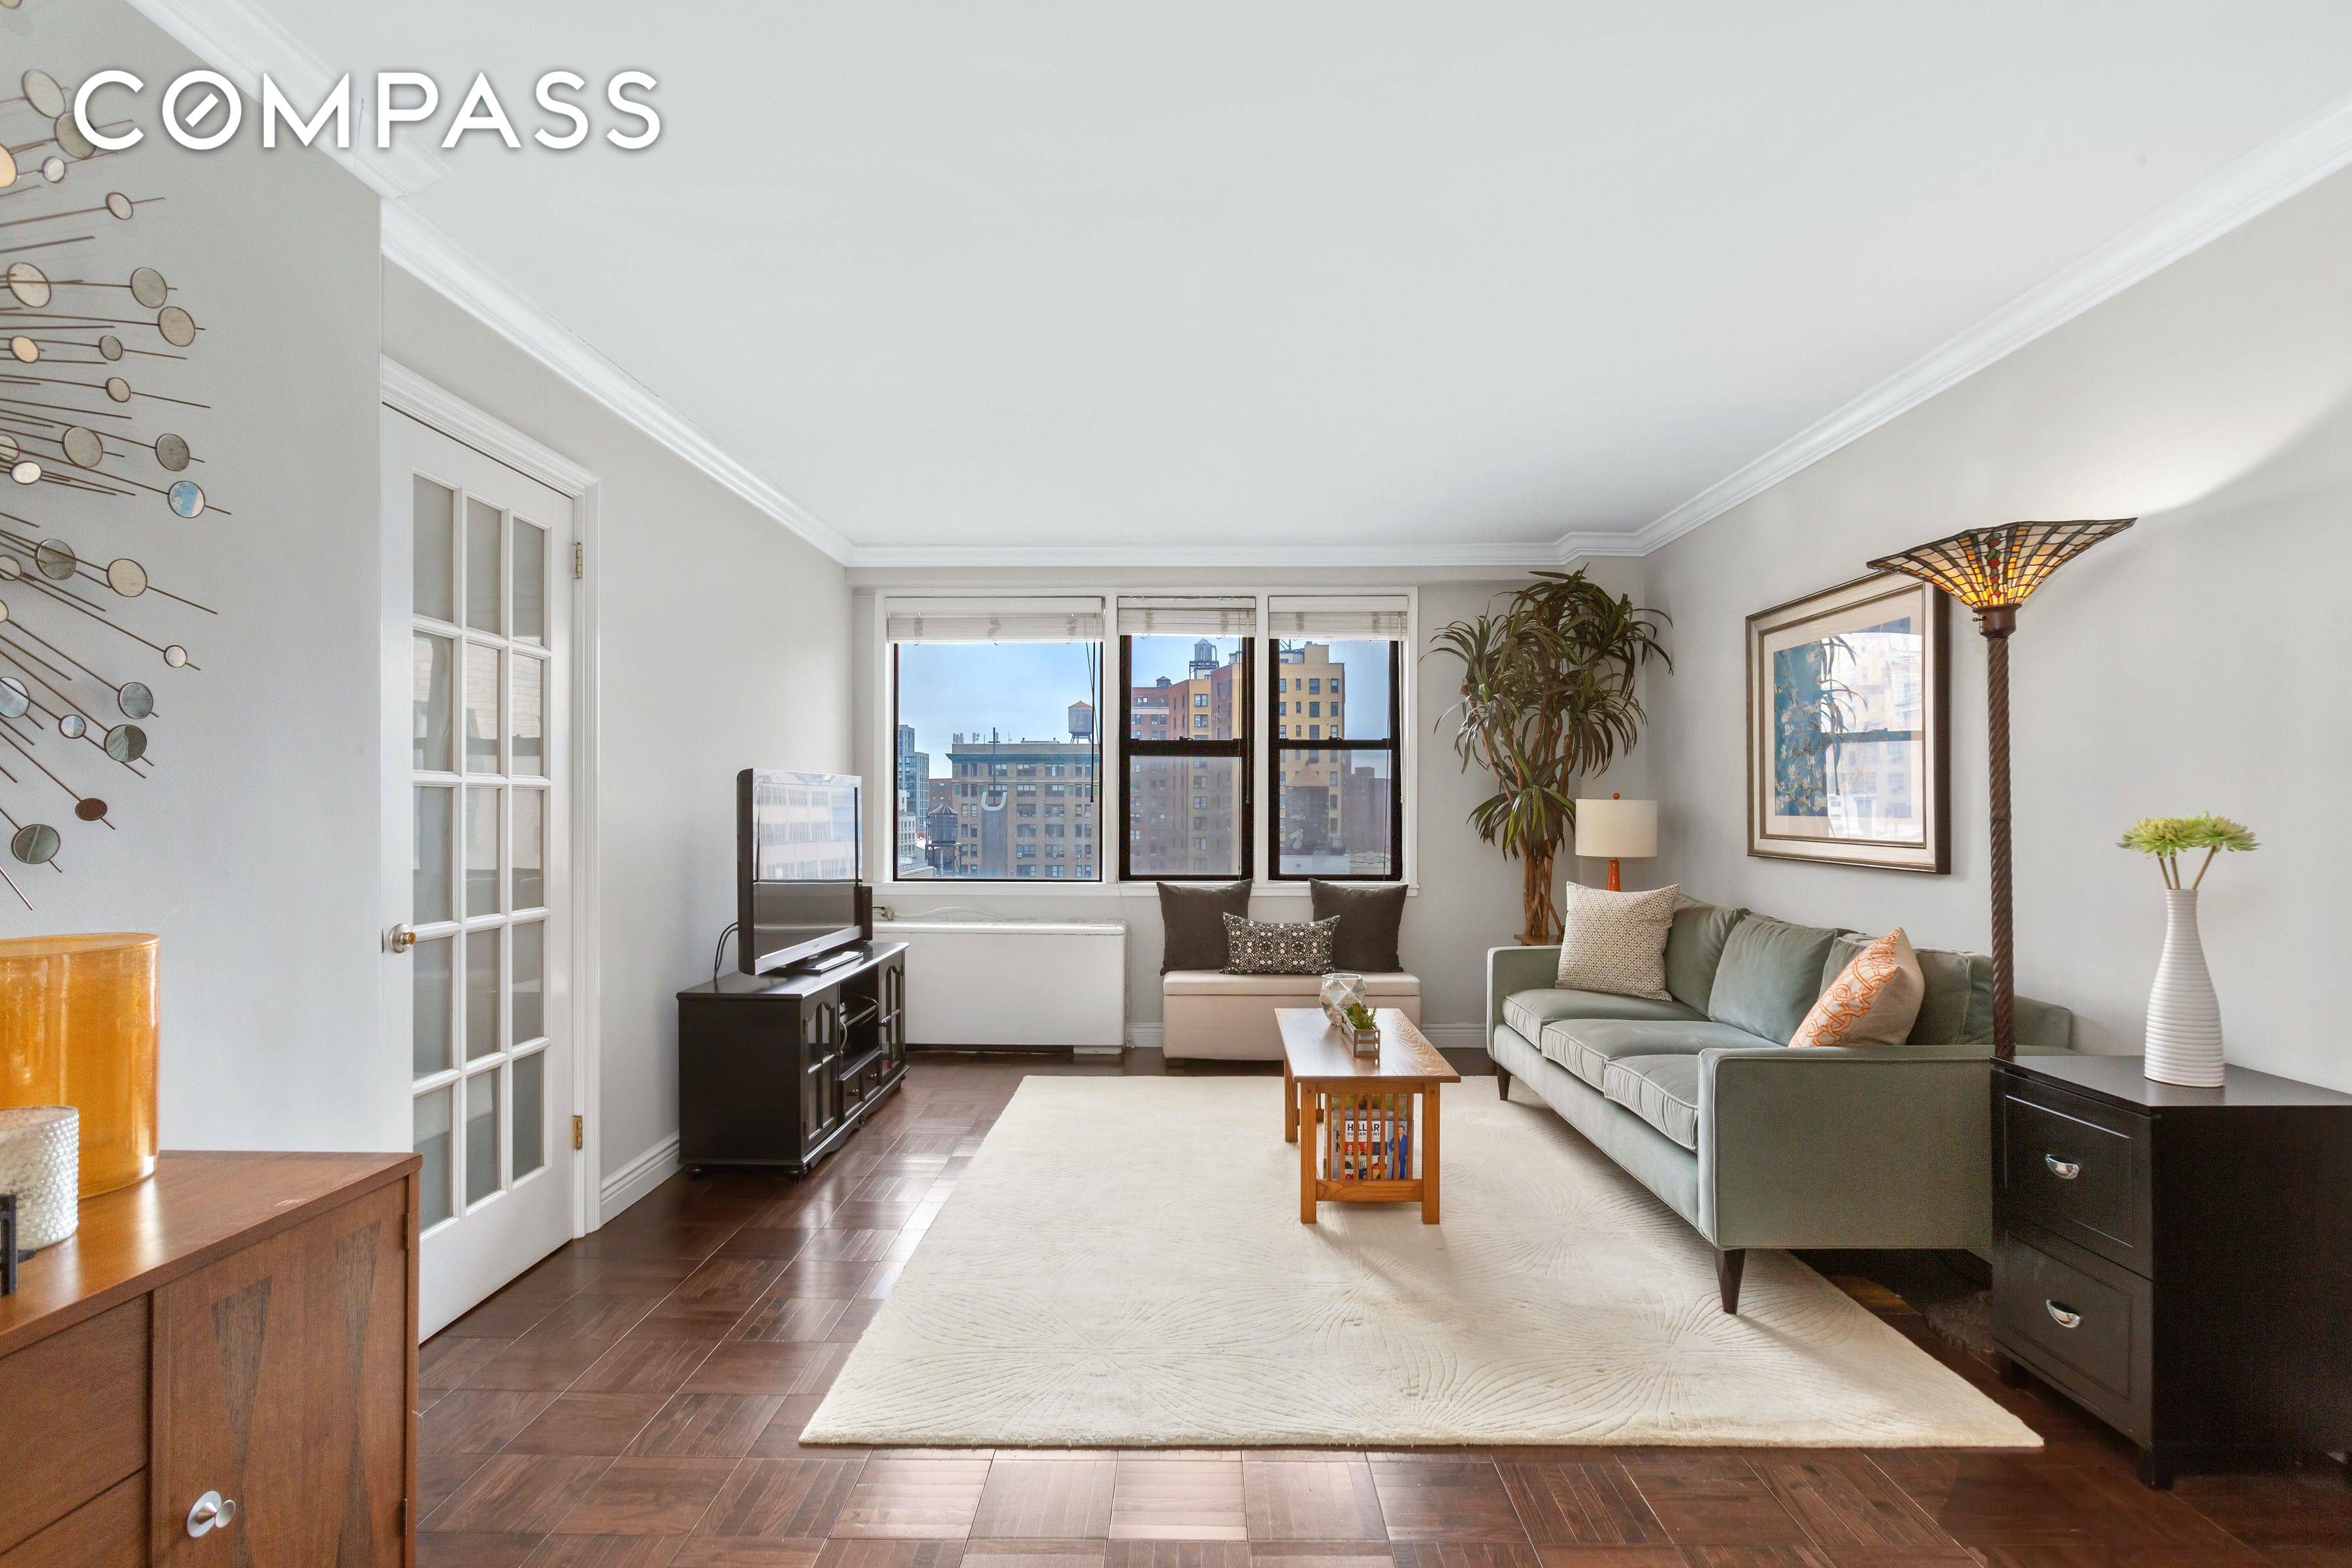 Bask in wonderful sunlight and wide open city views in this updated high floor one bedroom, one bathroom at Quaker Ridge, one of Gramercy's most sought after cooperatives.